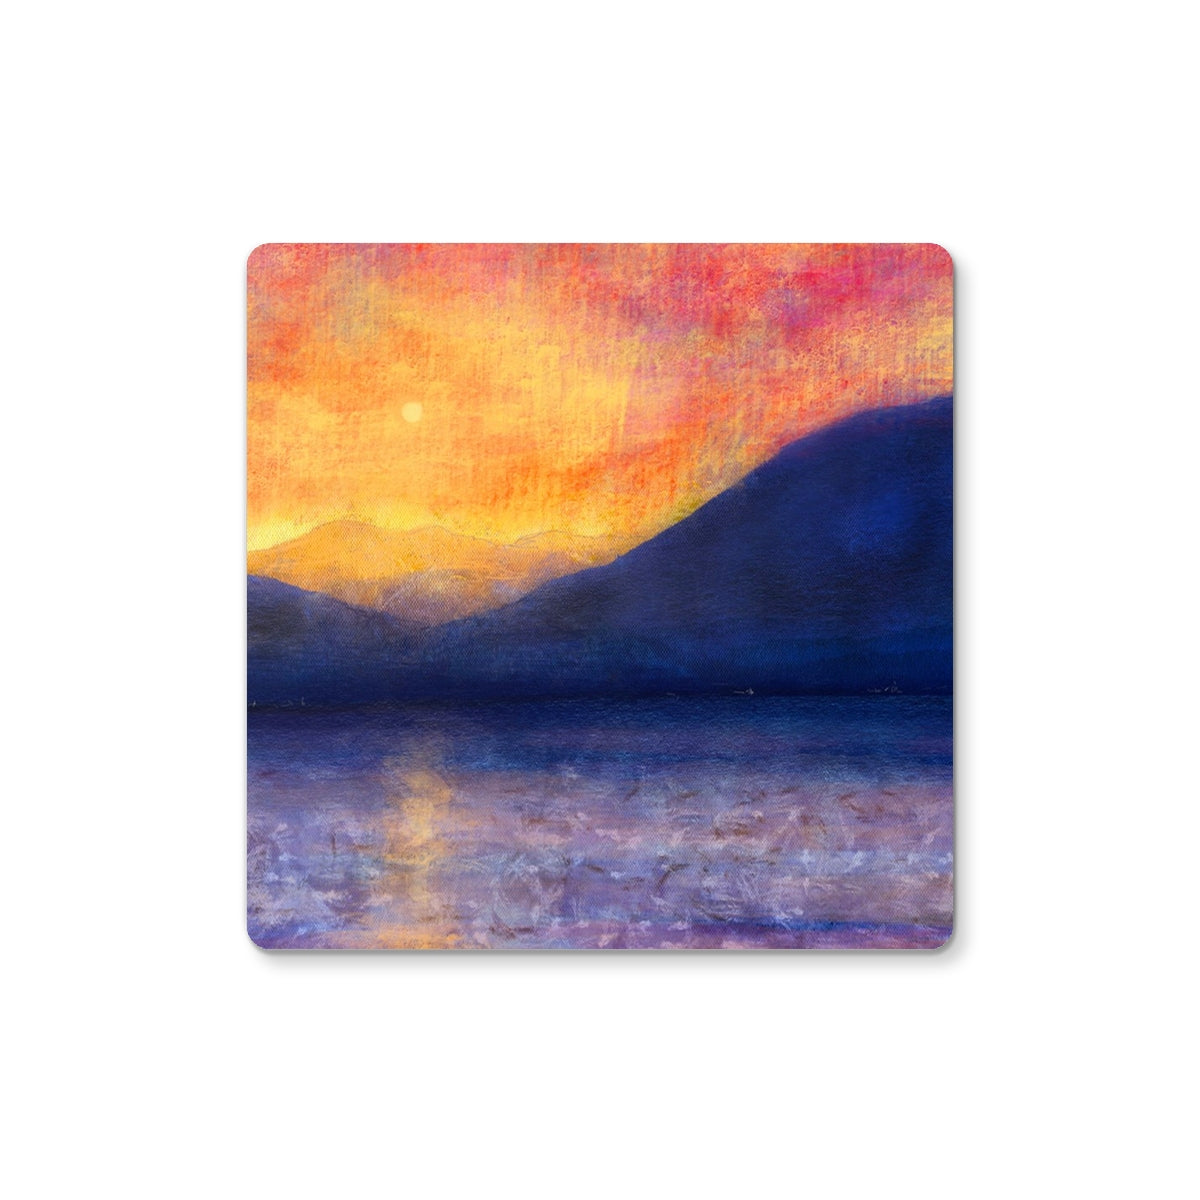 Sunset Approaching Mull Art Gifts Coaster-Coasters-Hebridean Islands Art Gallery-Single Coaster-Paintings, Prints, Homeware, Art Gifts From Scotland By Scottish Artist Kevin Hunter